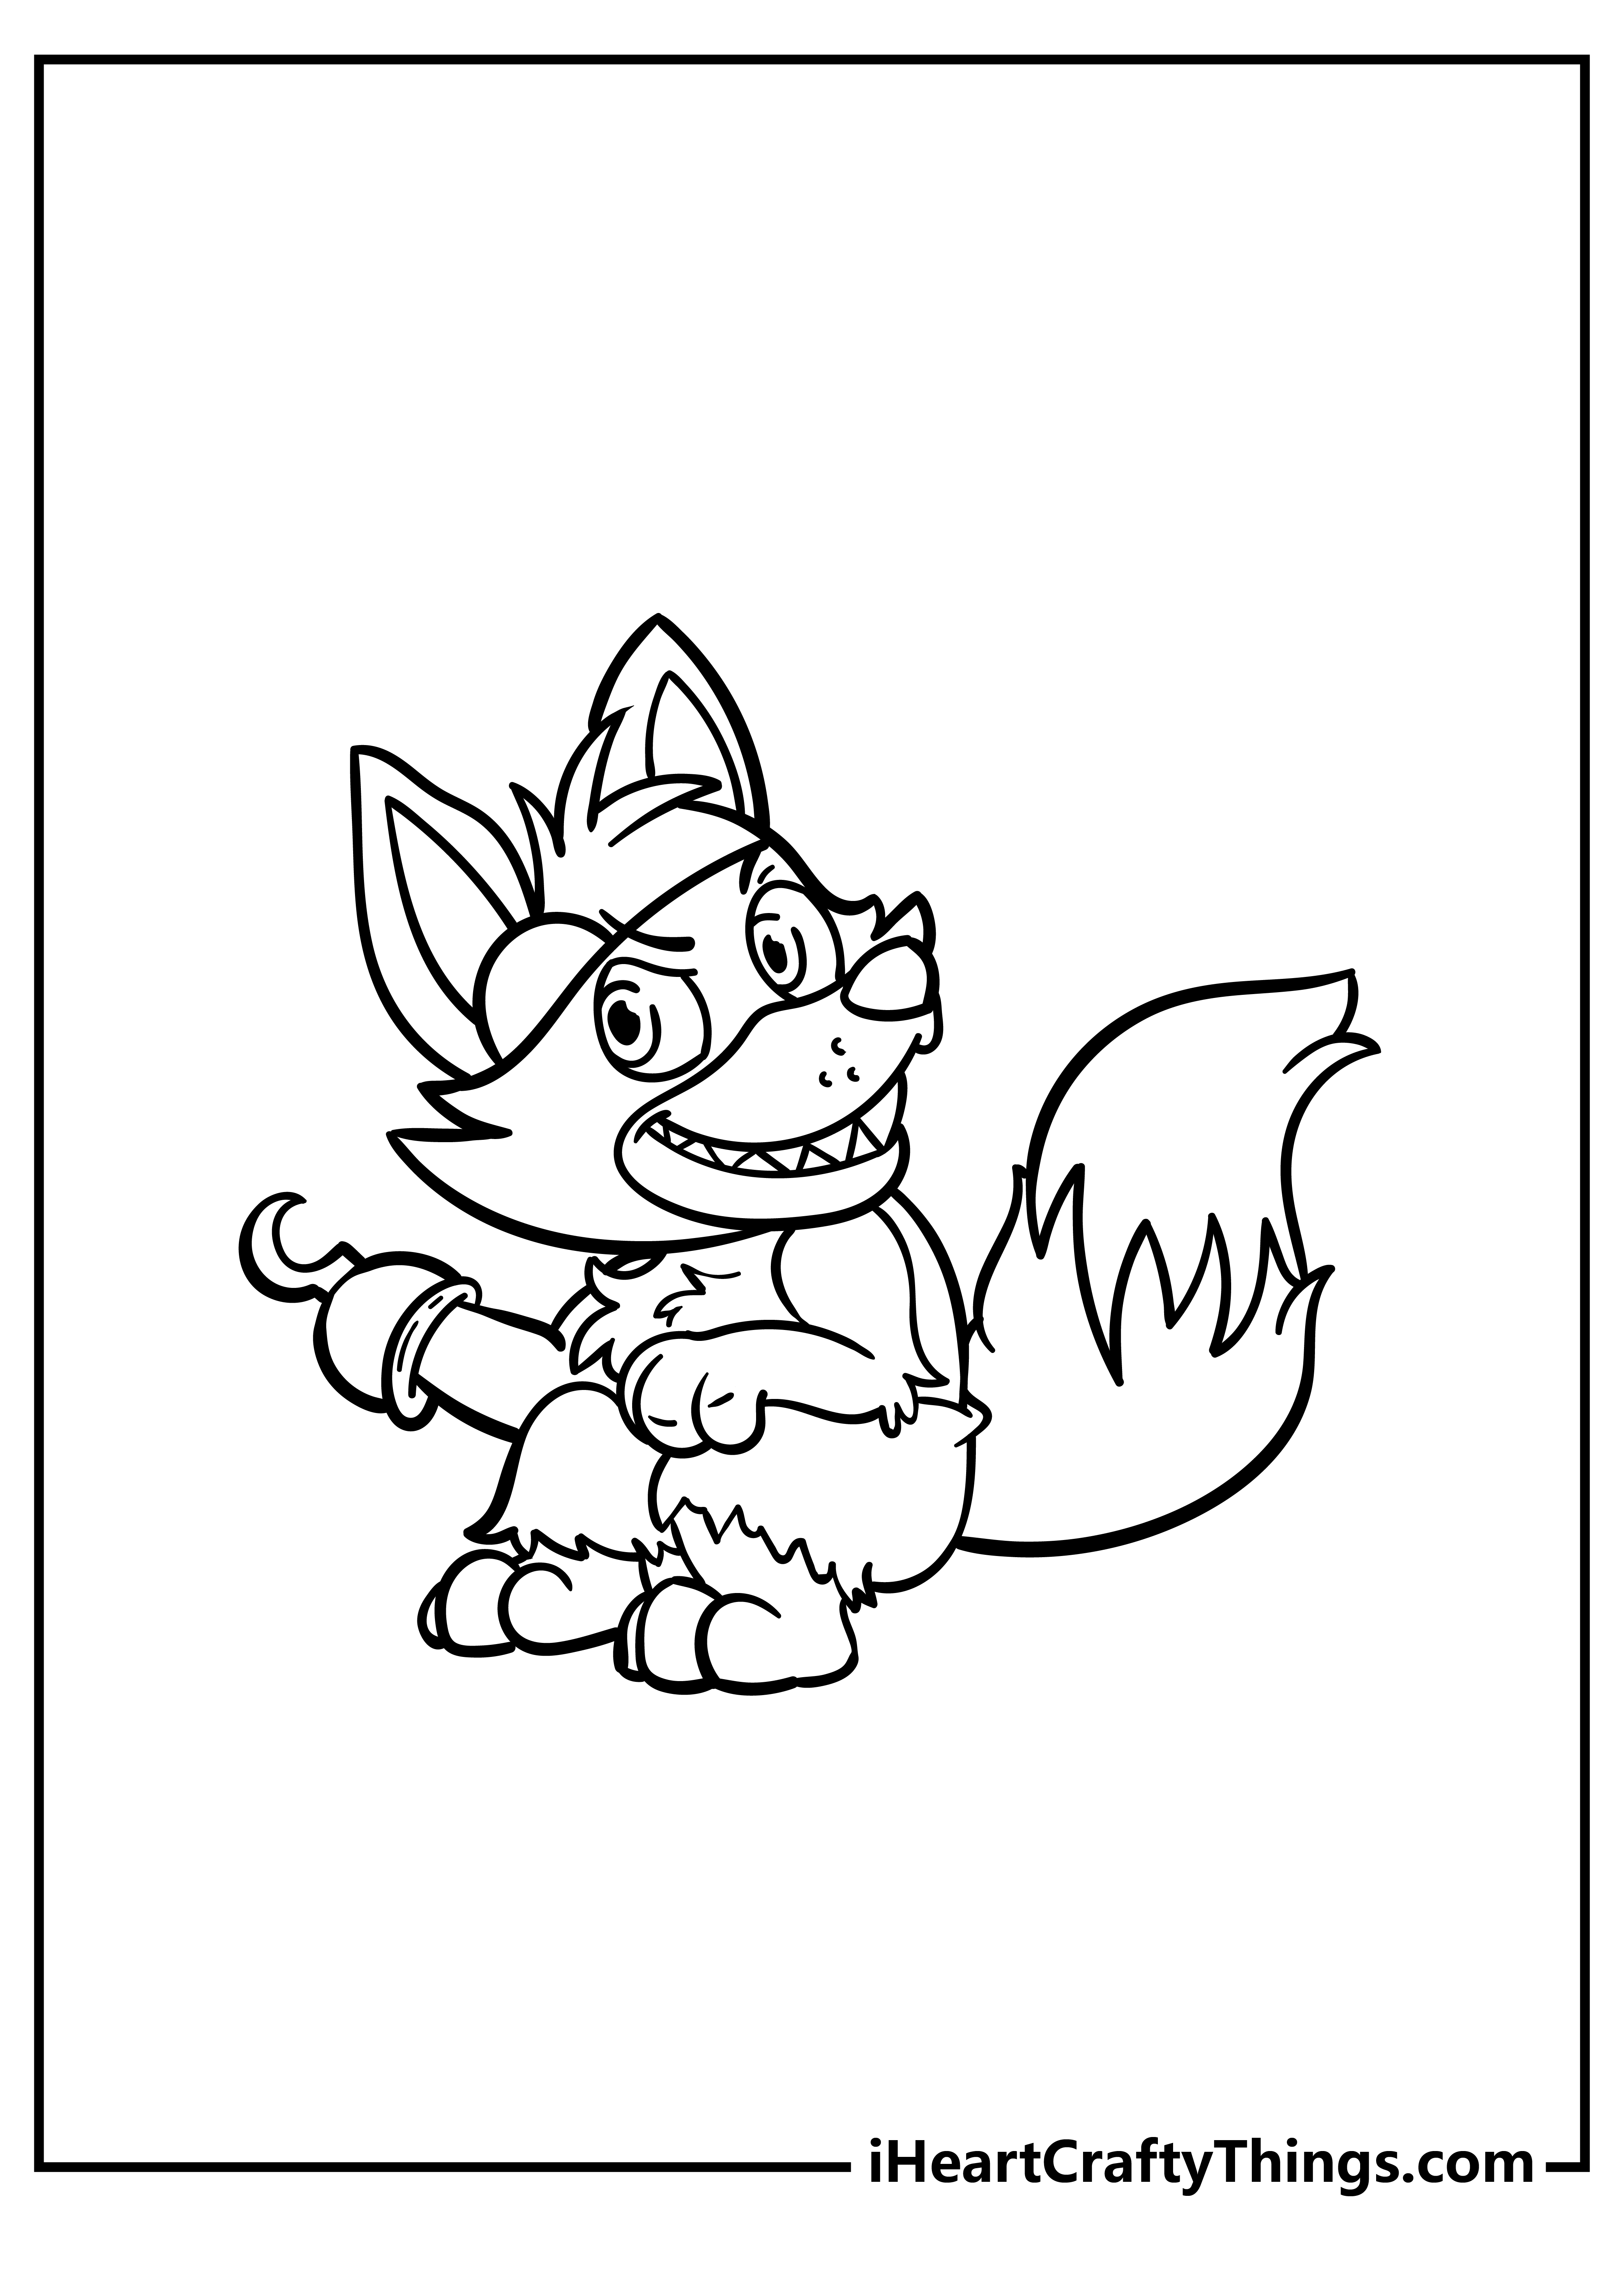 Printable Five Nights At Freddy's Coloring Pages (Updated 2022)